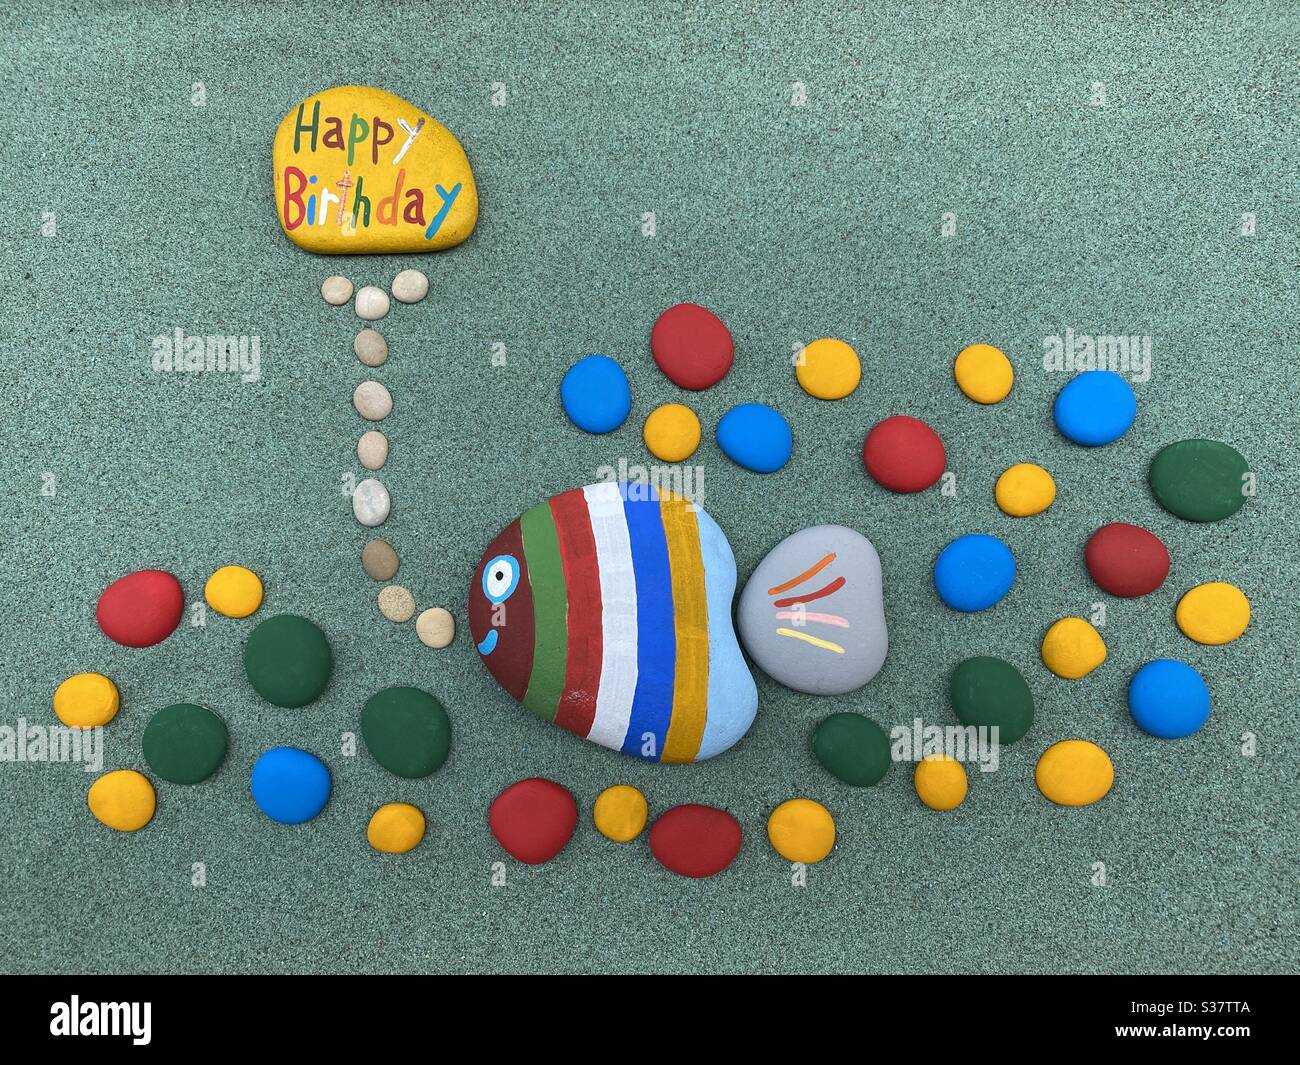 Happy Birthday composition with funny colorful stones over green sand Stock Photo